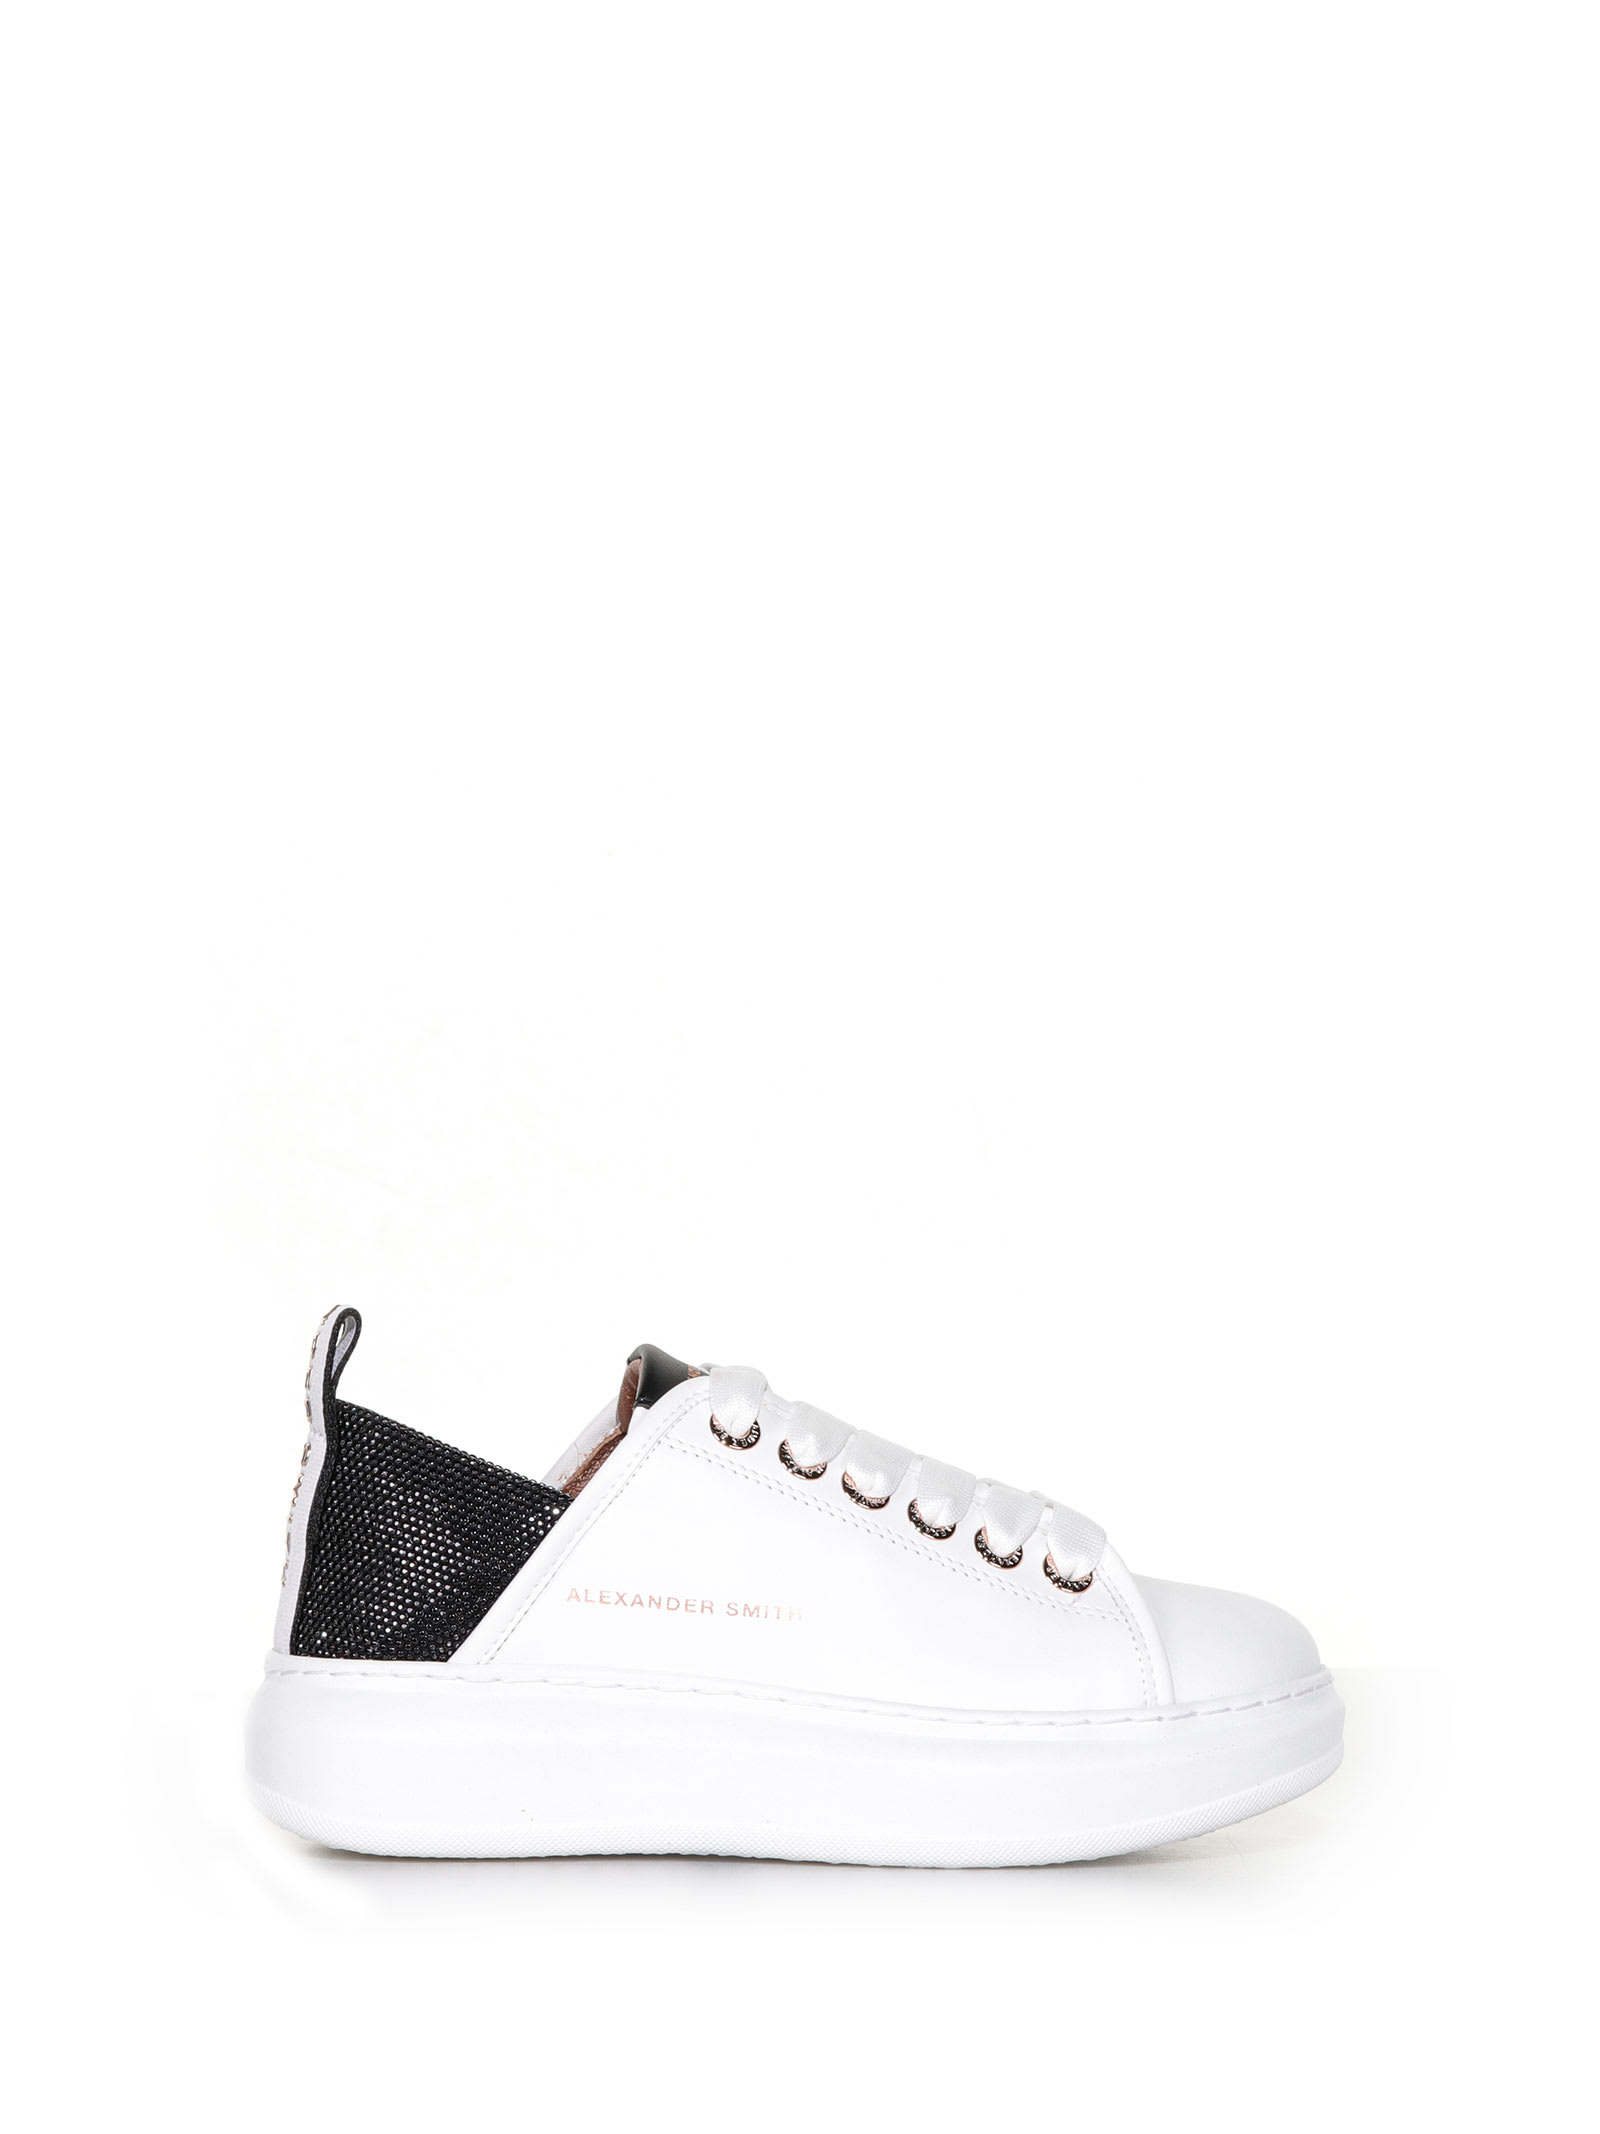 Alexander Smith Leather Sneakers With Micro Studs In Bianco /nero